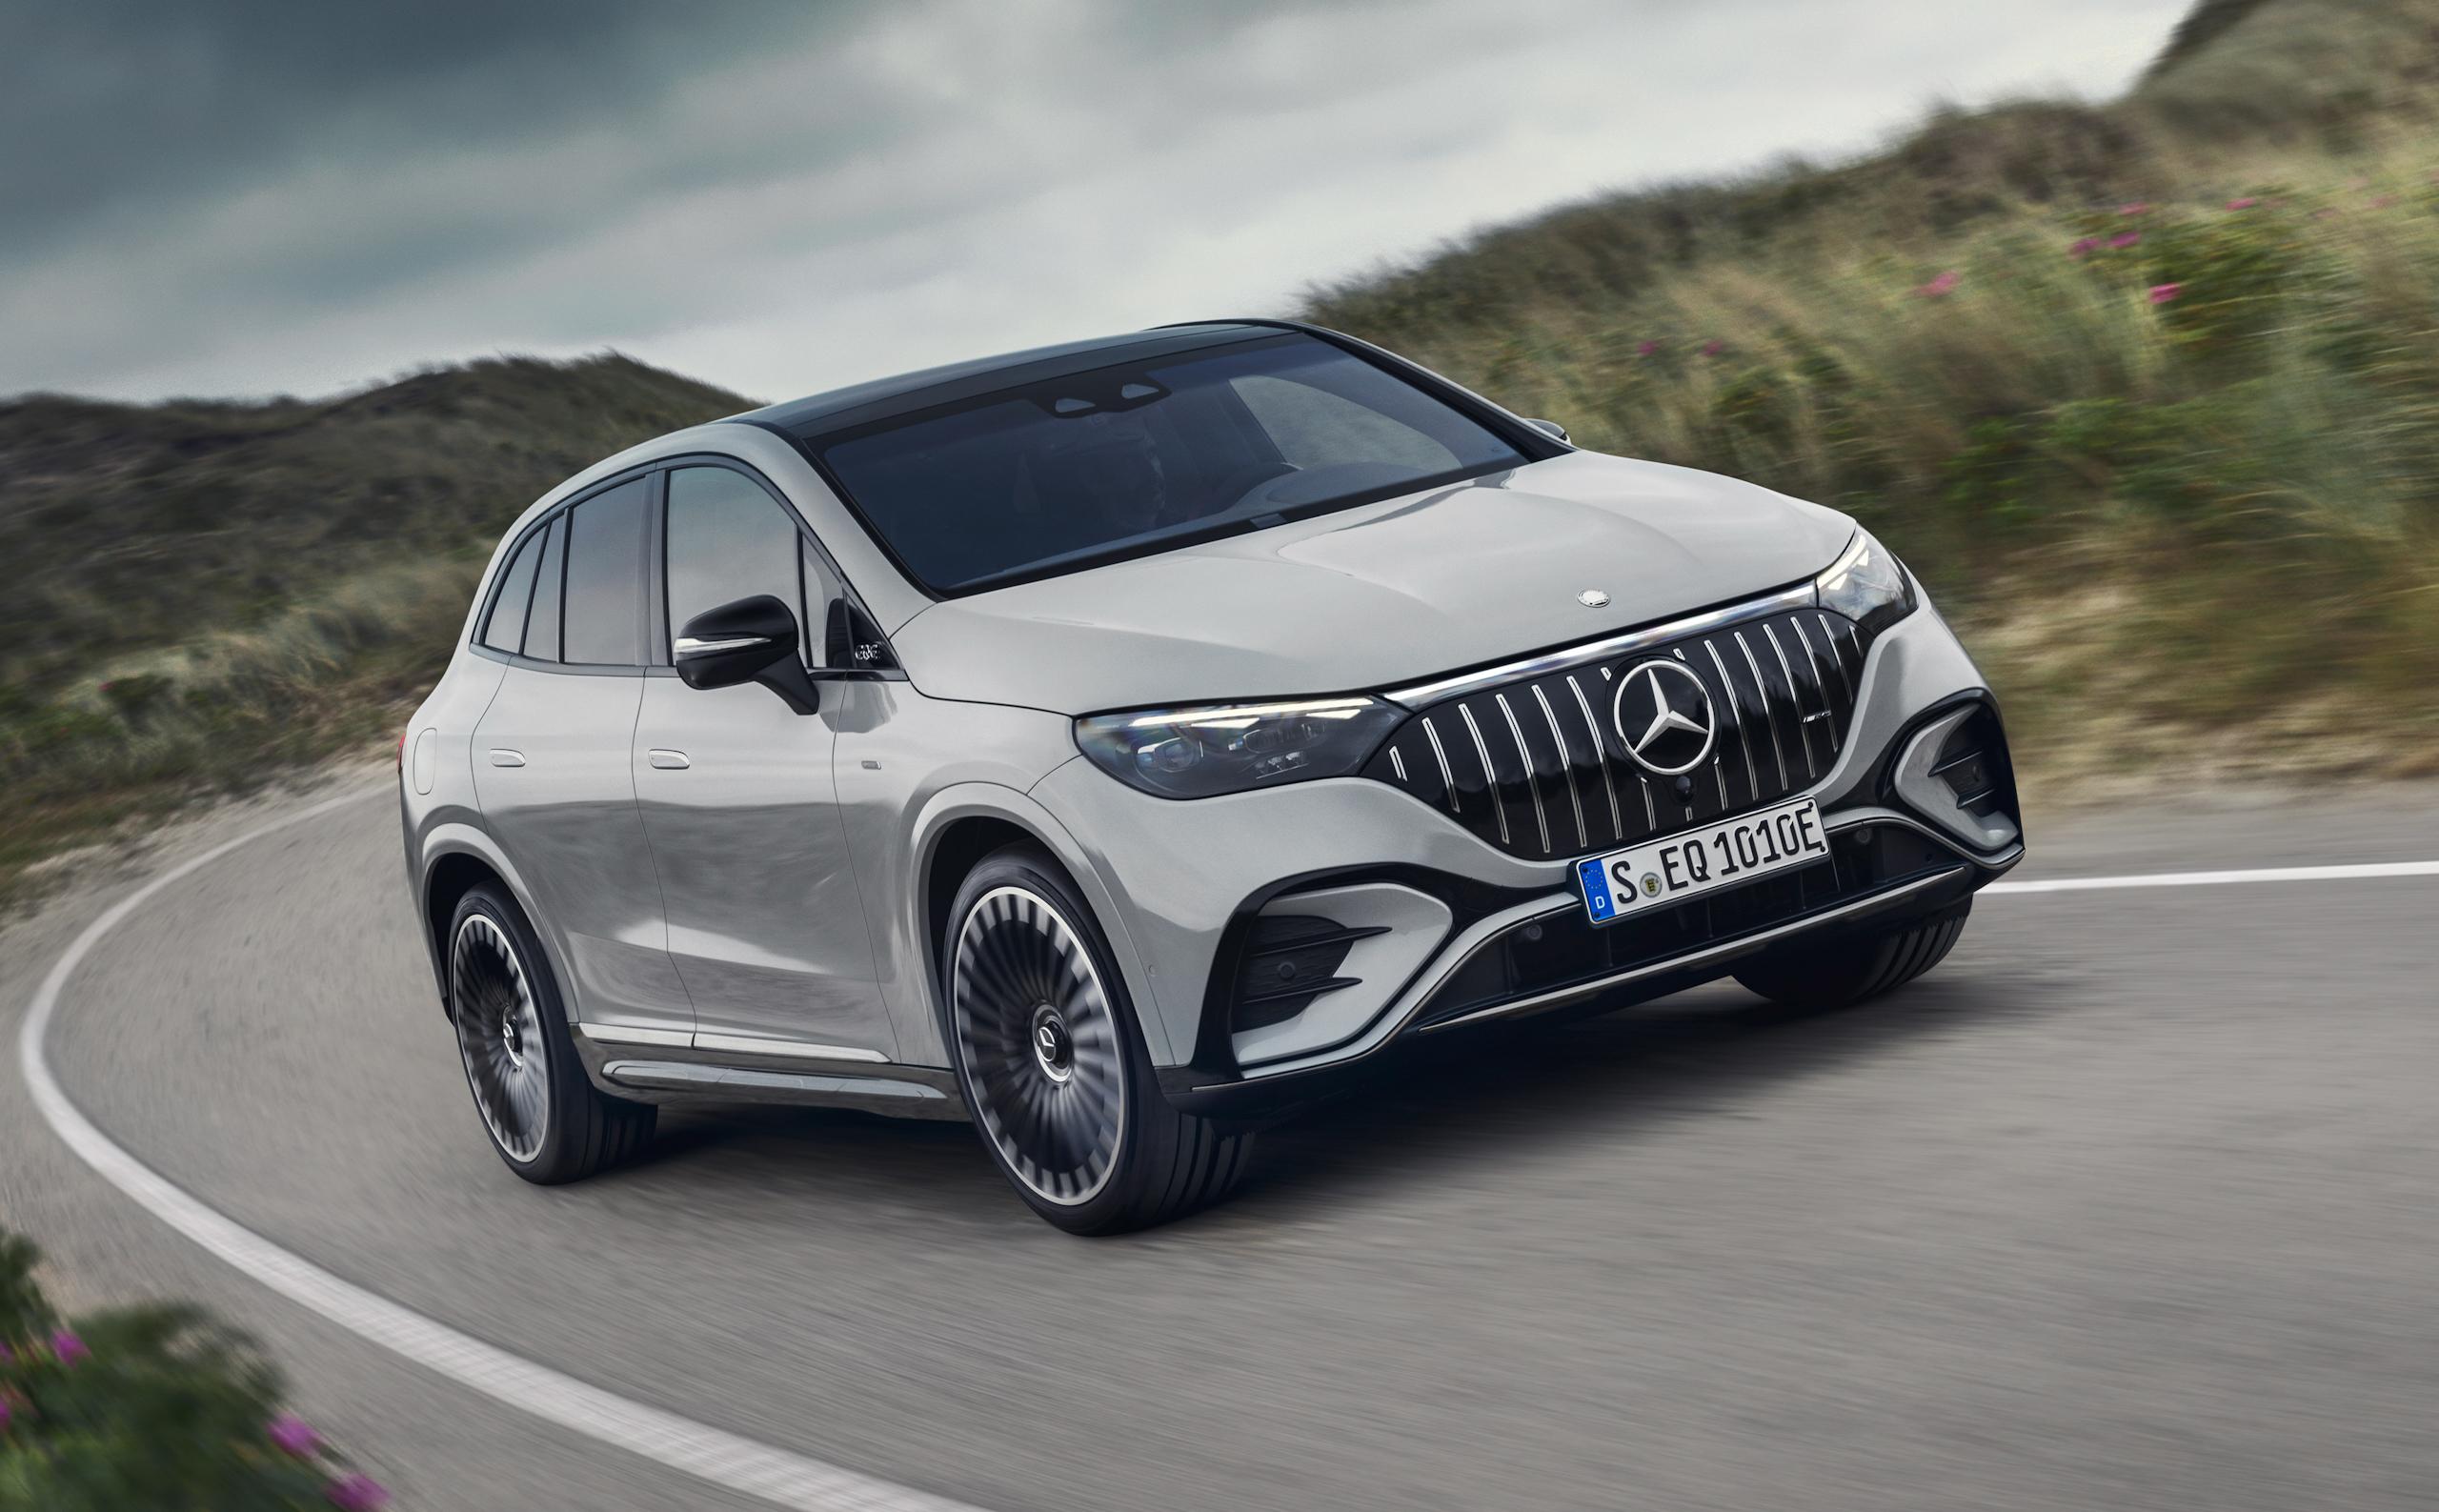 Der neue Mercedes-AMG EQE 53 4MATIC+ SUVThe new Mercedes-AMG EQE 53 4MATIC+ SUV